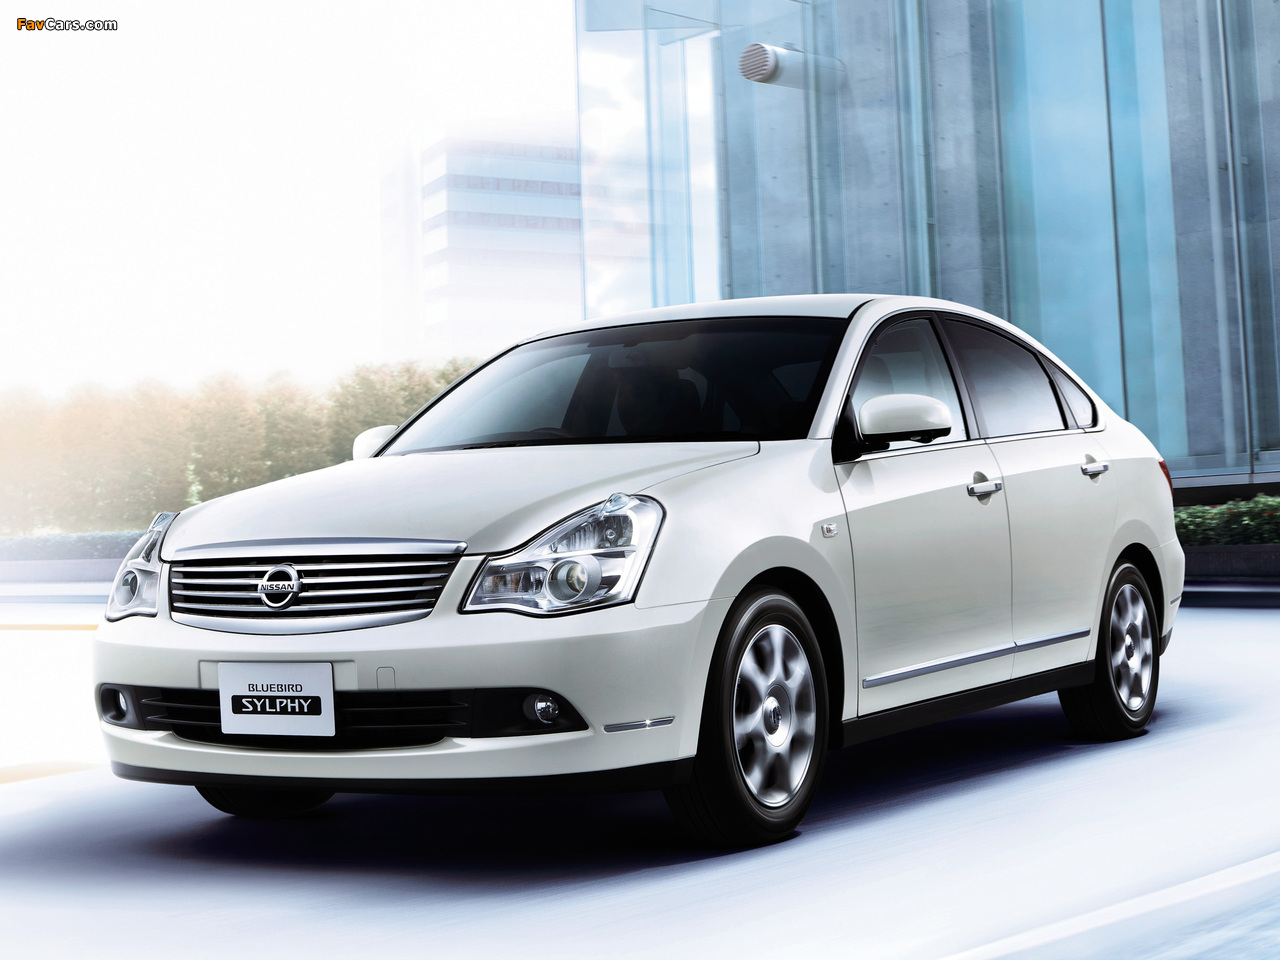 Nissan Bluebird Sylphy (G11) 2005 pictures (1280 x 960)